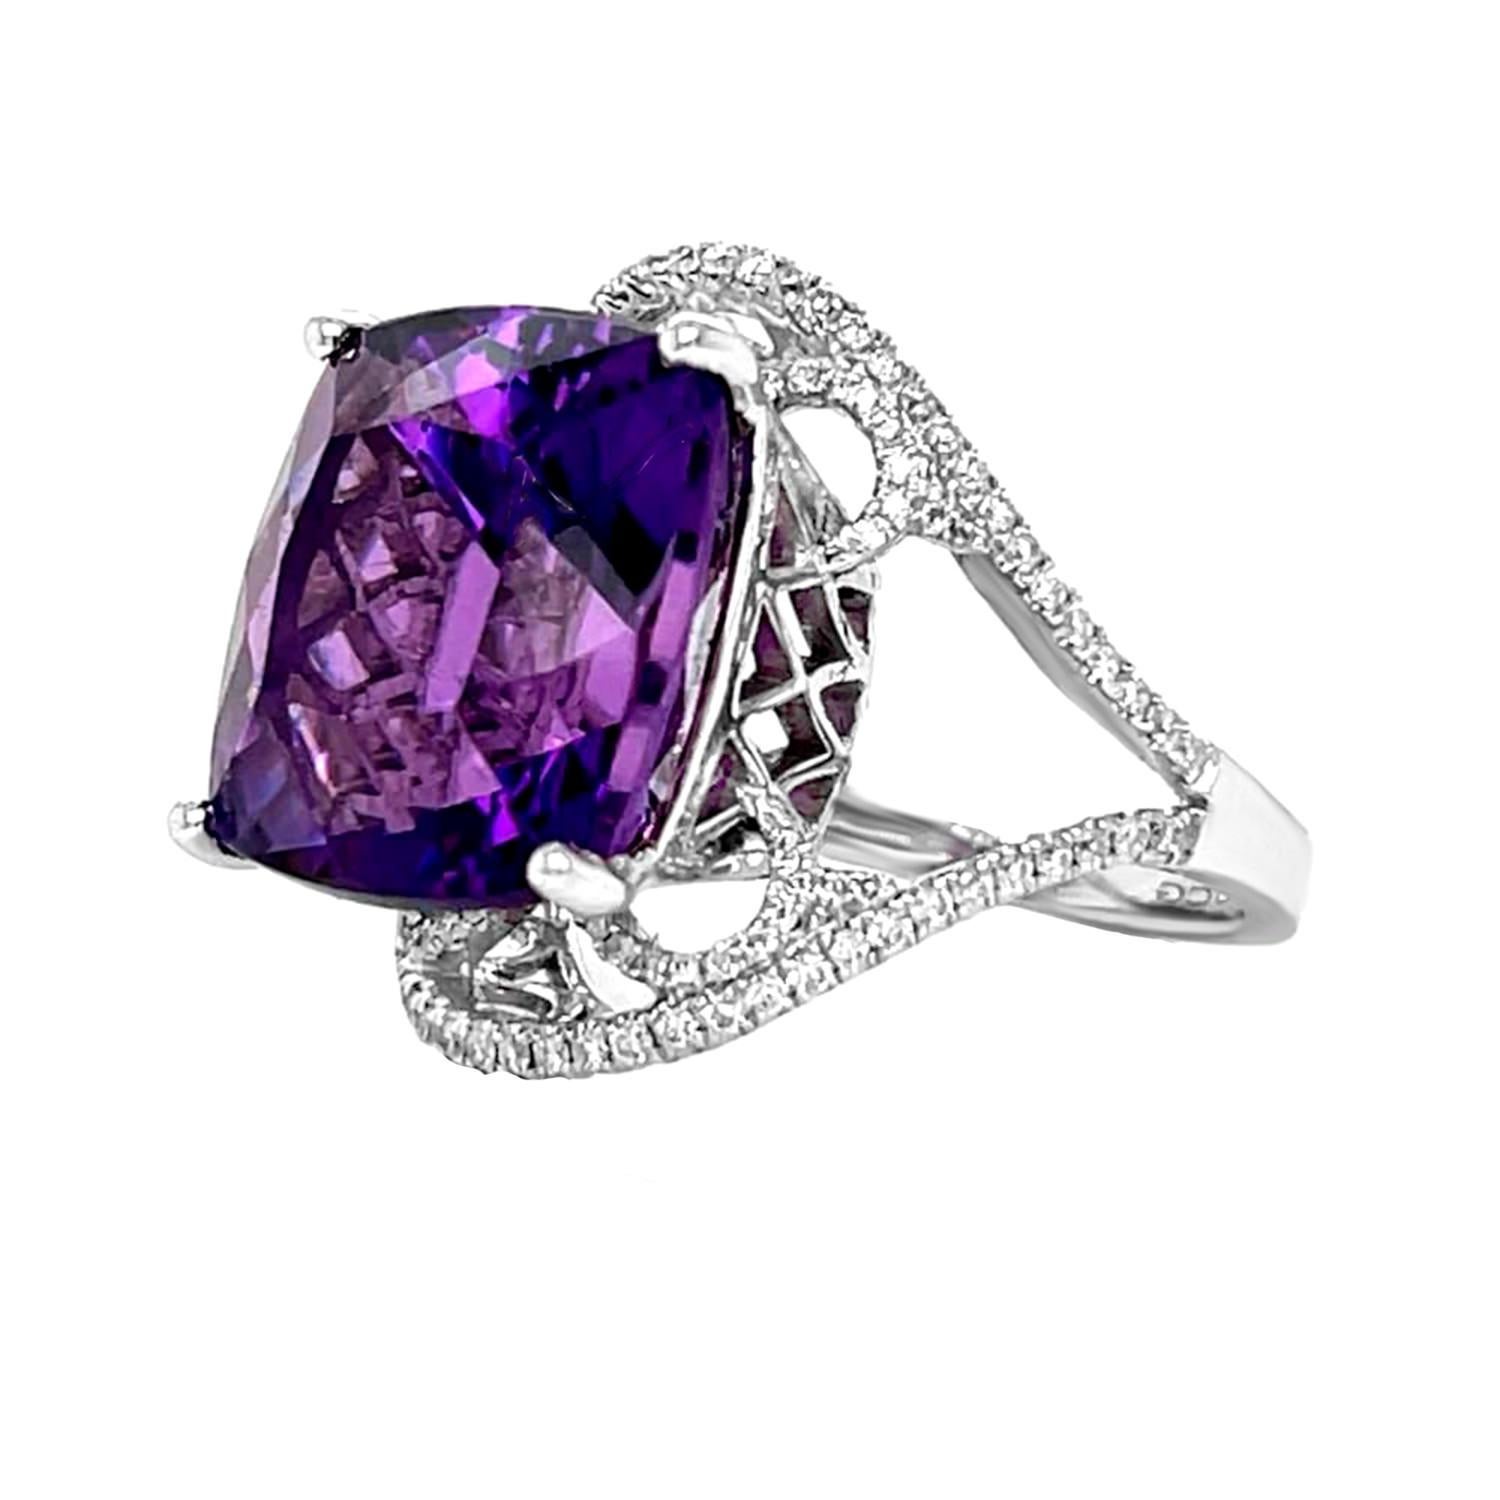 Amethyst Ring With Diamonds 14.89 Carats 14K White Gold In Excellent Condition For Sale In Laguna Niguel, CA